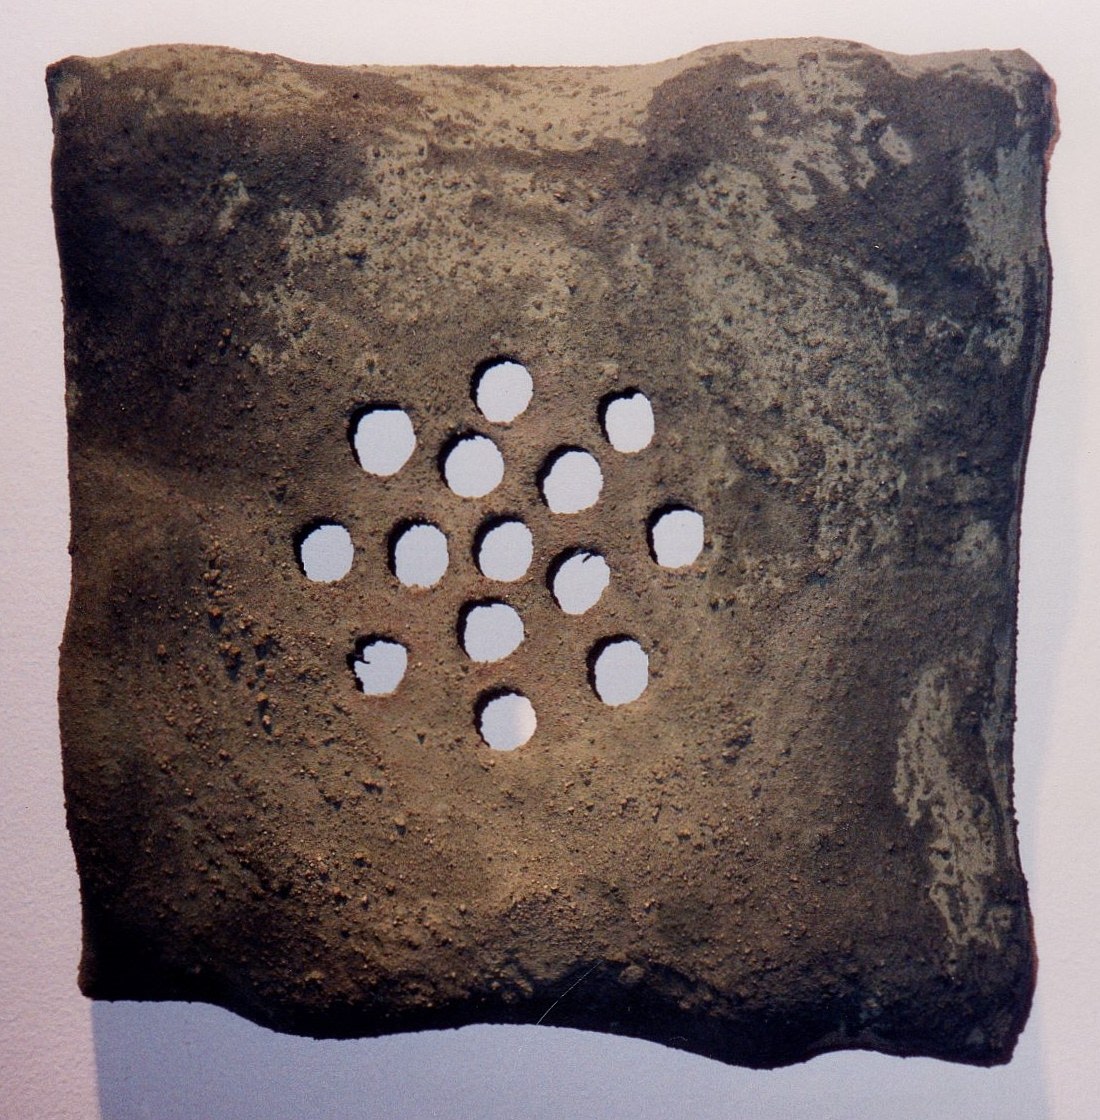 Ceramic with punched out  holes